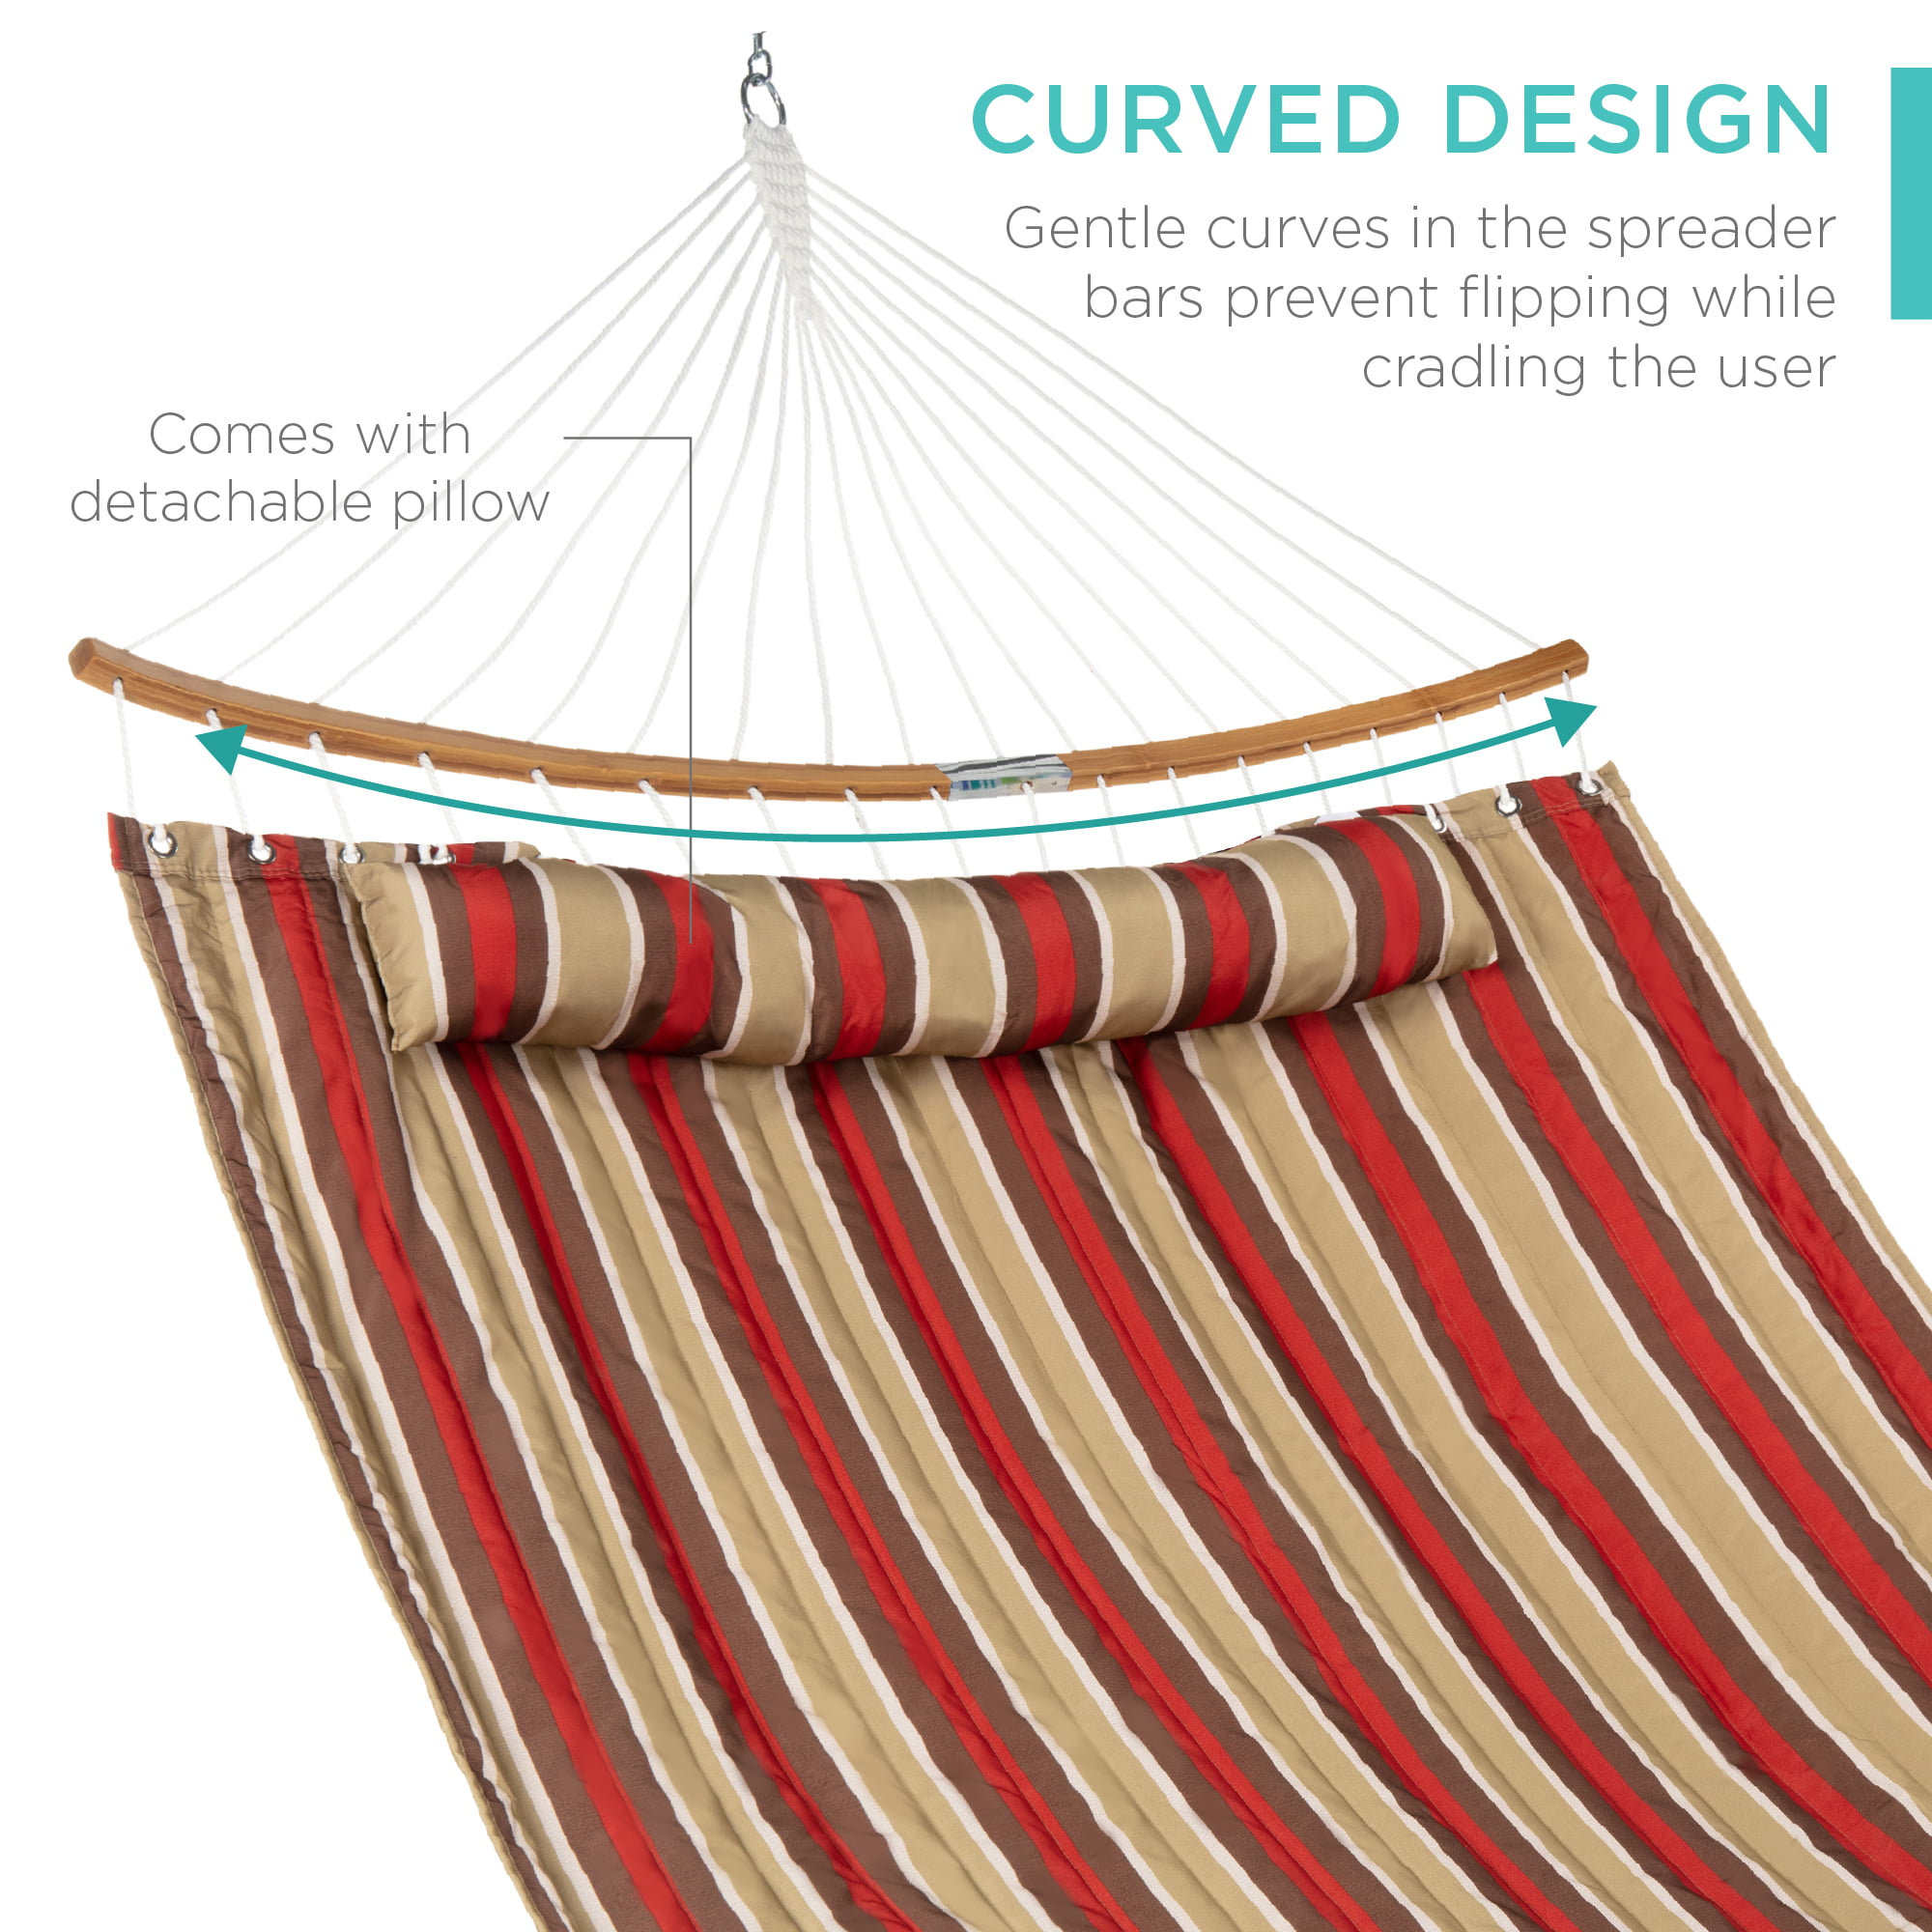 Best Choice Products 2-Person Portable Quilted Hammock w/ Curved Bamboo Spreader Bar, Pillow, Carry Bag - Burgundy/Tan - 2